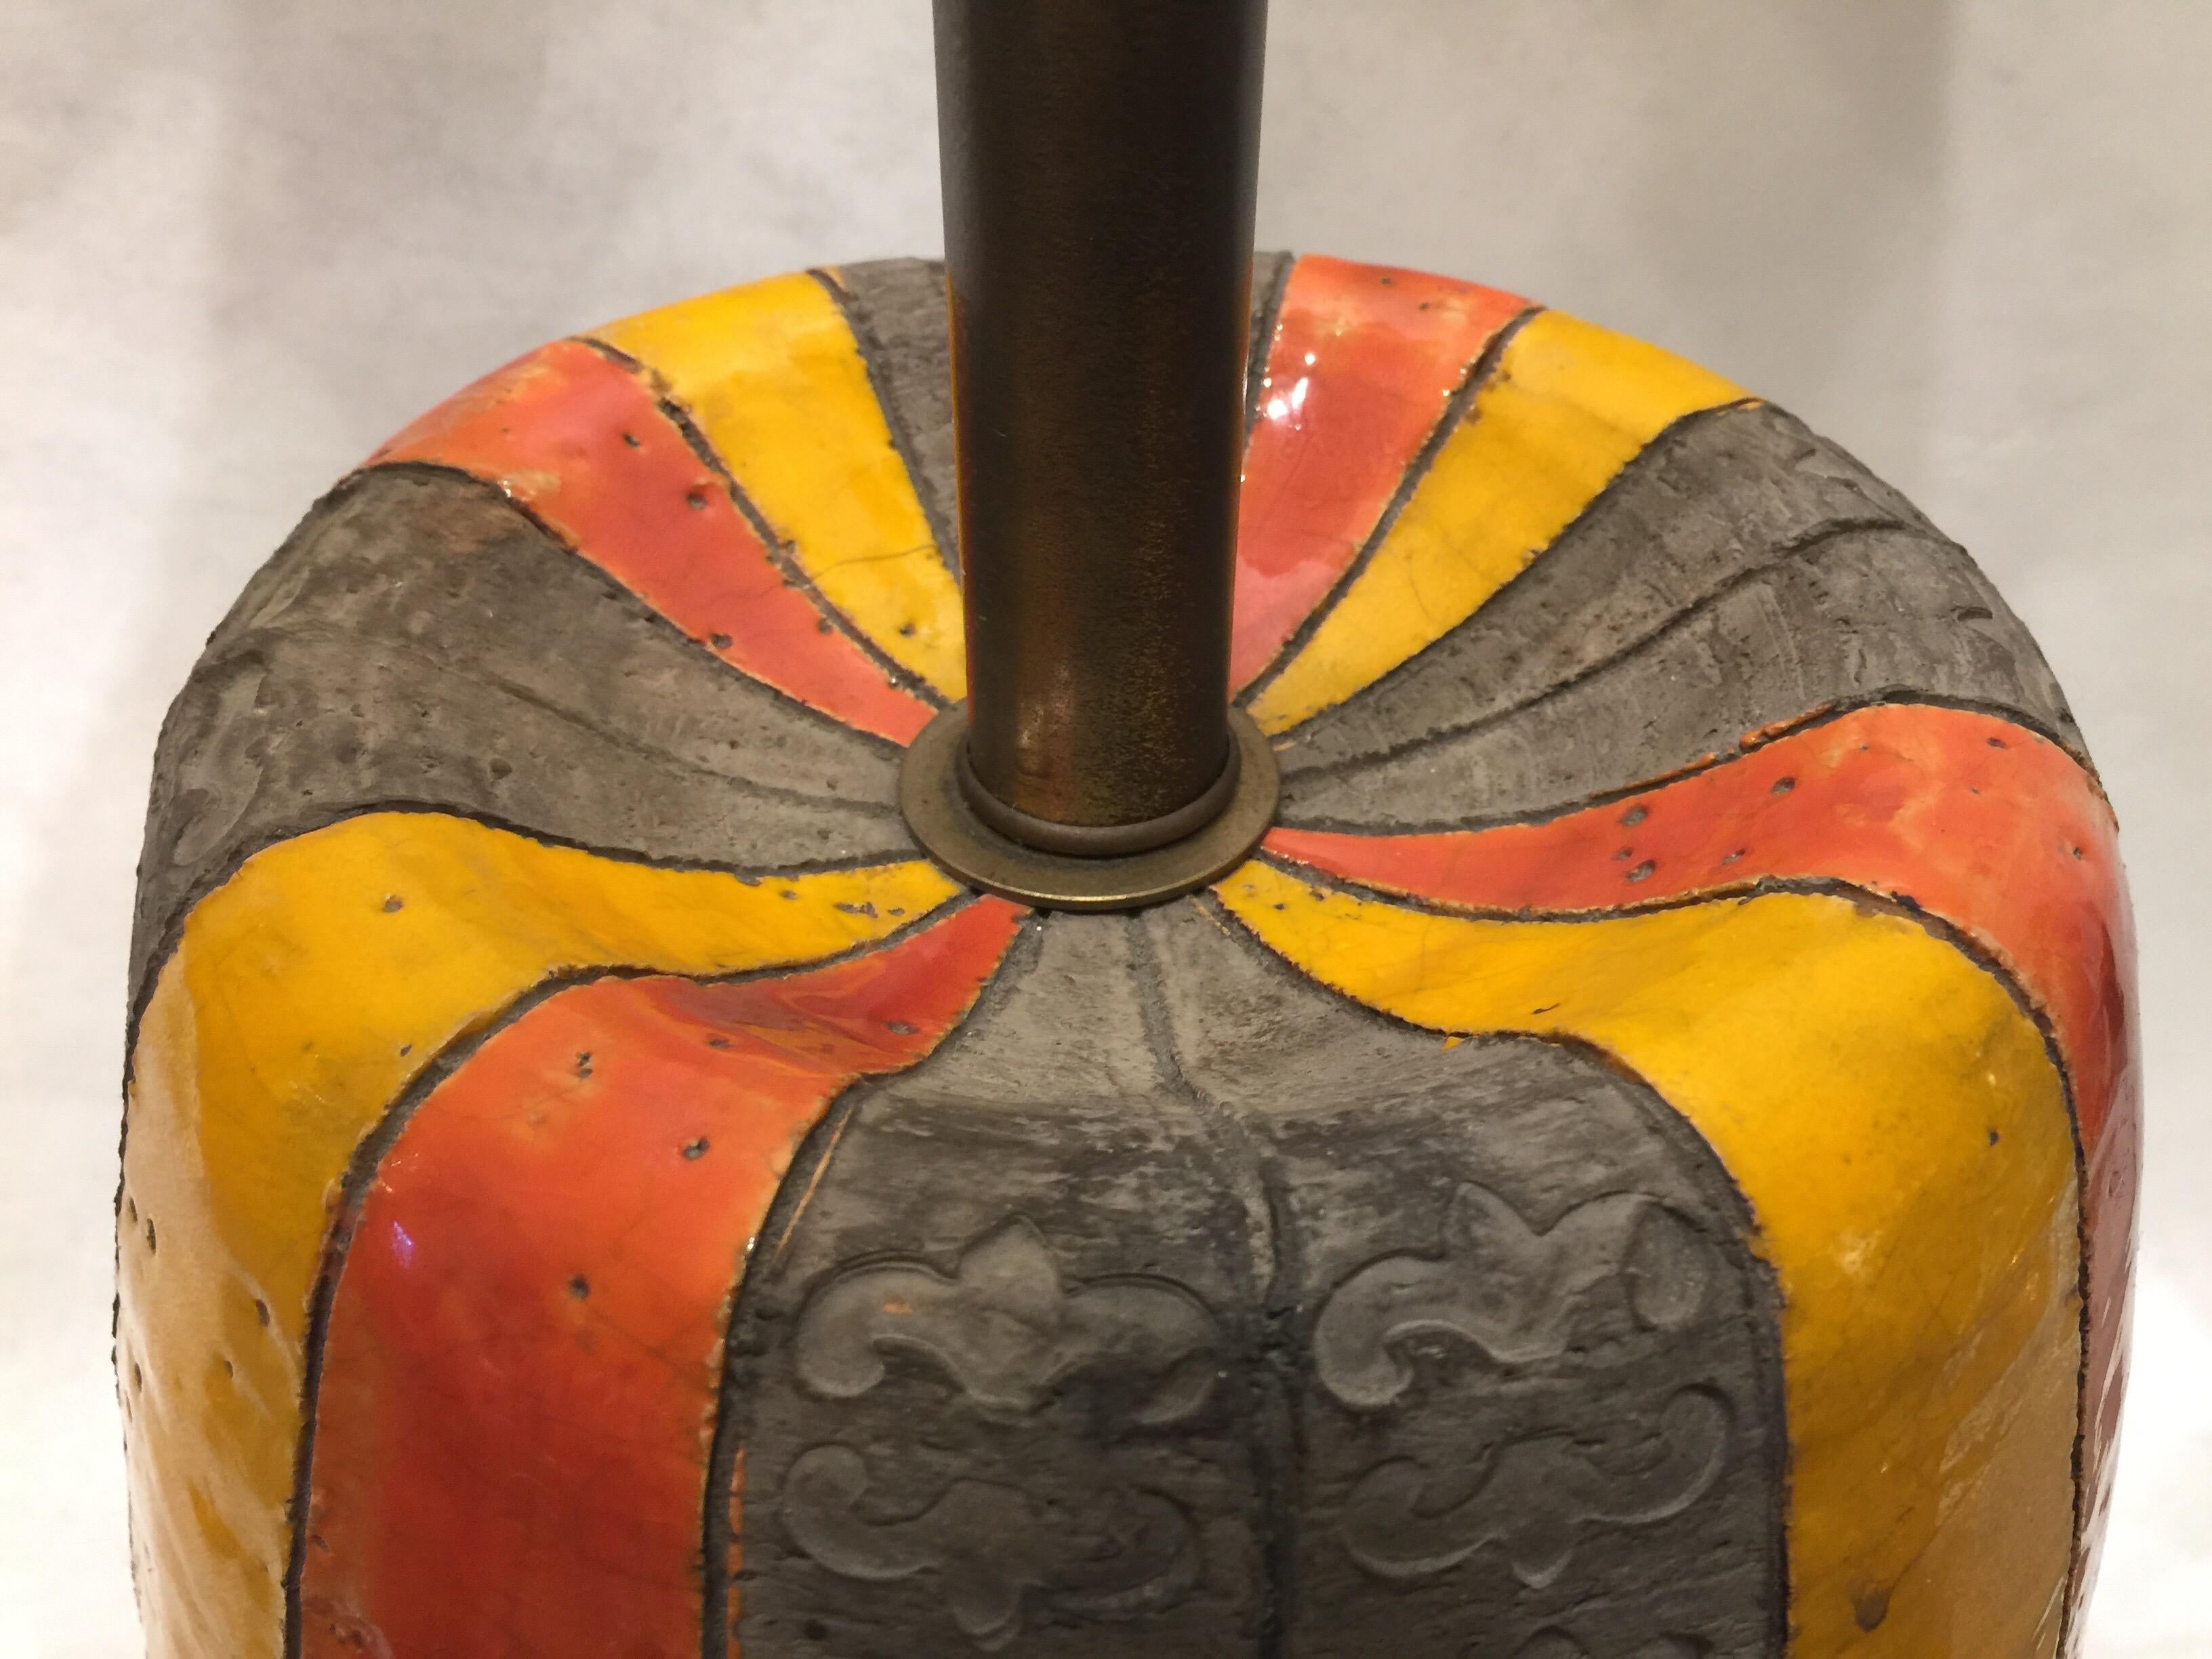 This very large Bitossi lamp designed by Aldo Londi features rich vibrant colors and a rough volcanic style textured print to the base. Labelled and in good original wiring working condition. No shade shown or included.

Note: Base or ceramic